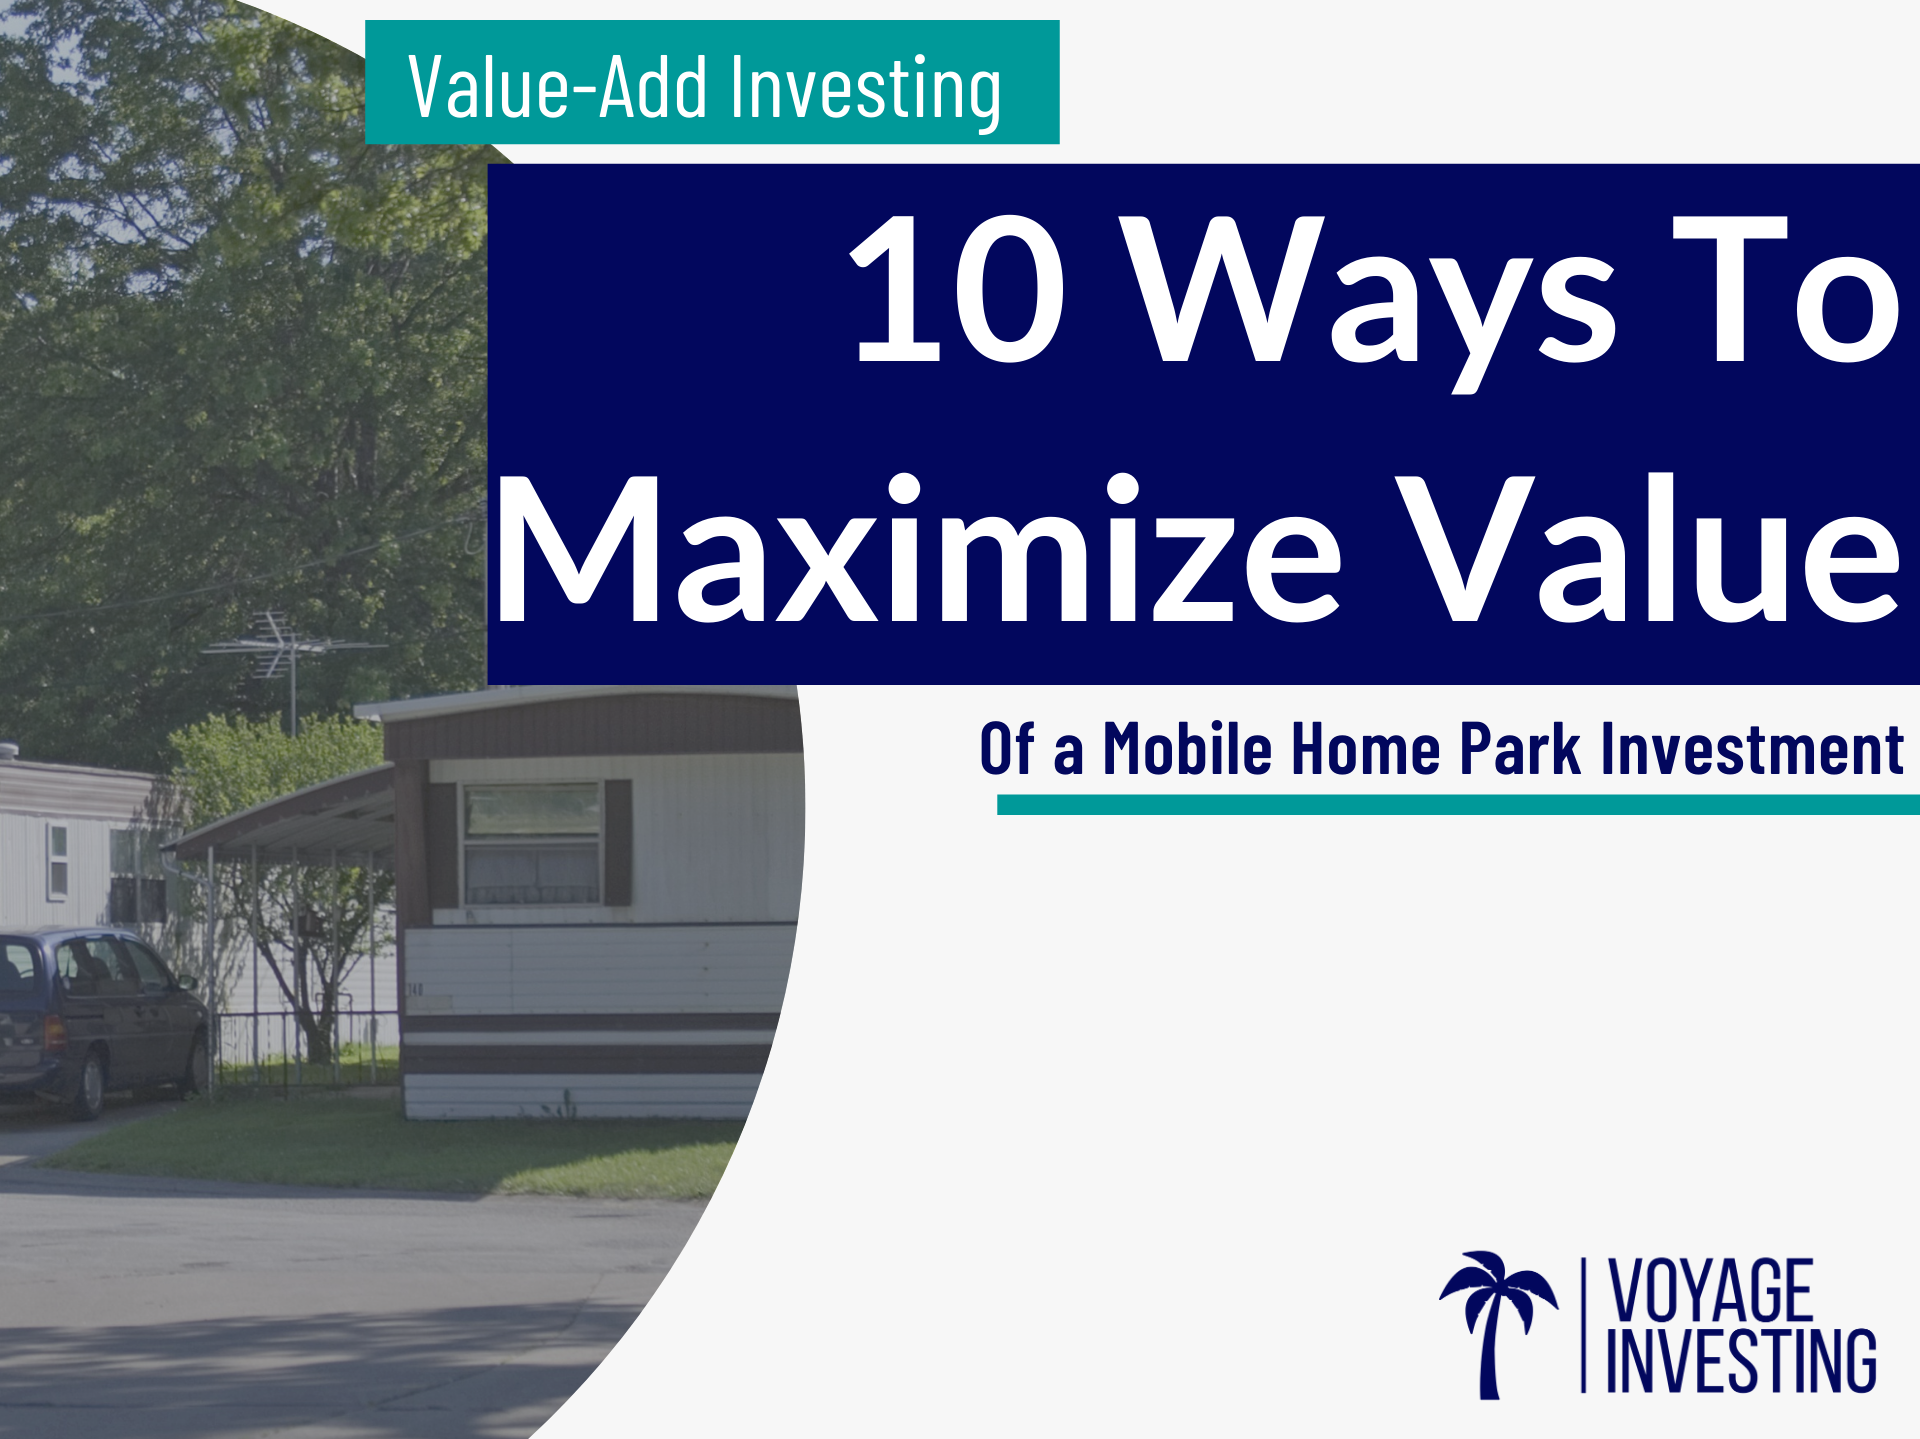 10 Ways to Add Value to a Mobile Home Park